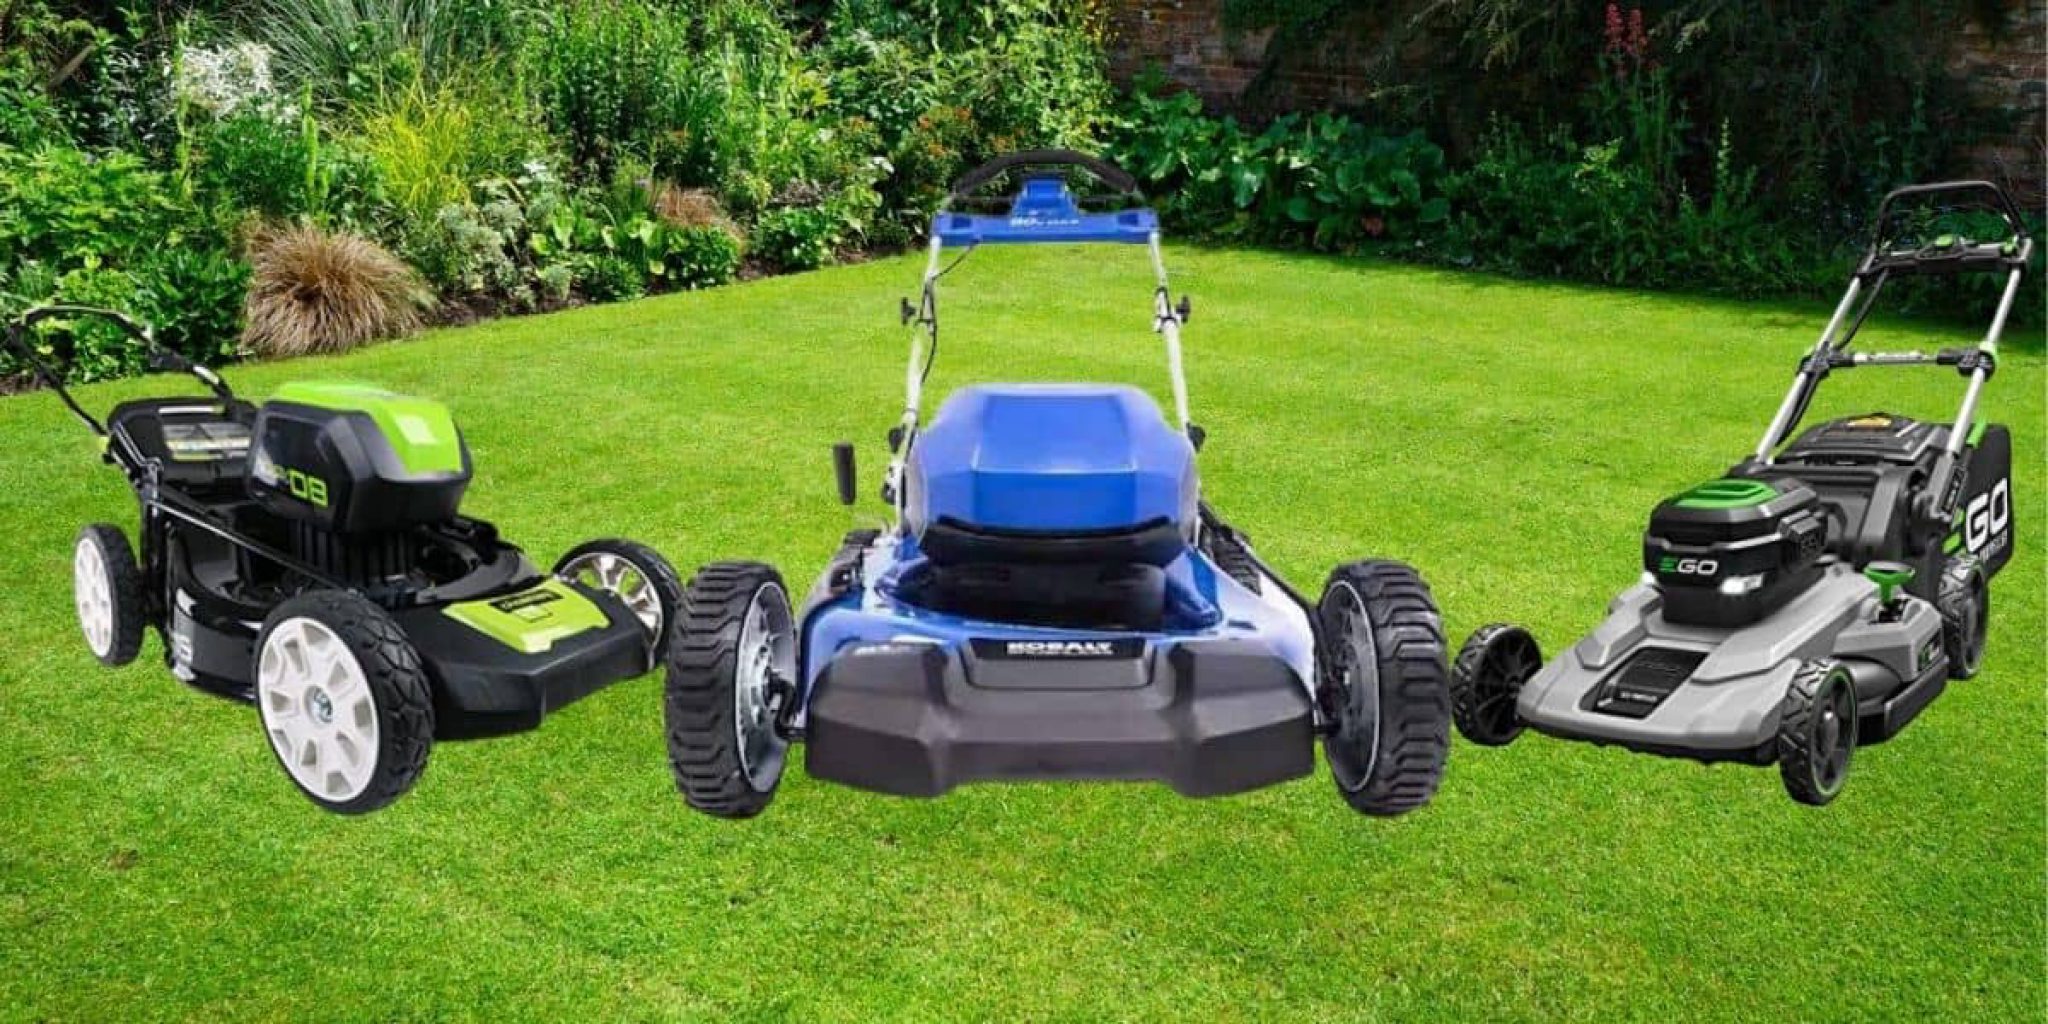 {Top 10} Best Electric Lawn Mower Review and Buying Guide in 2020